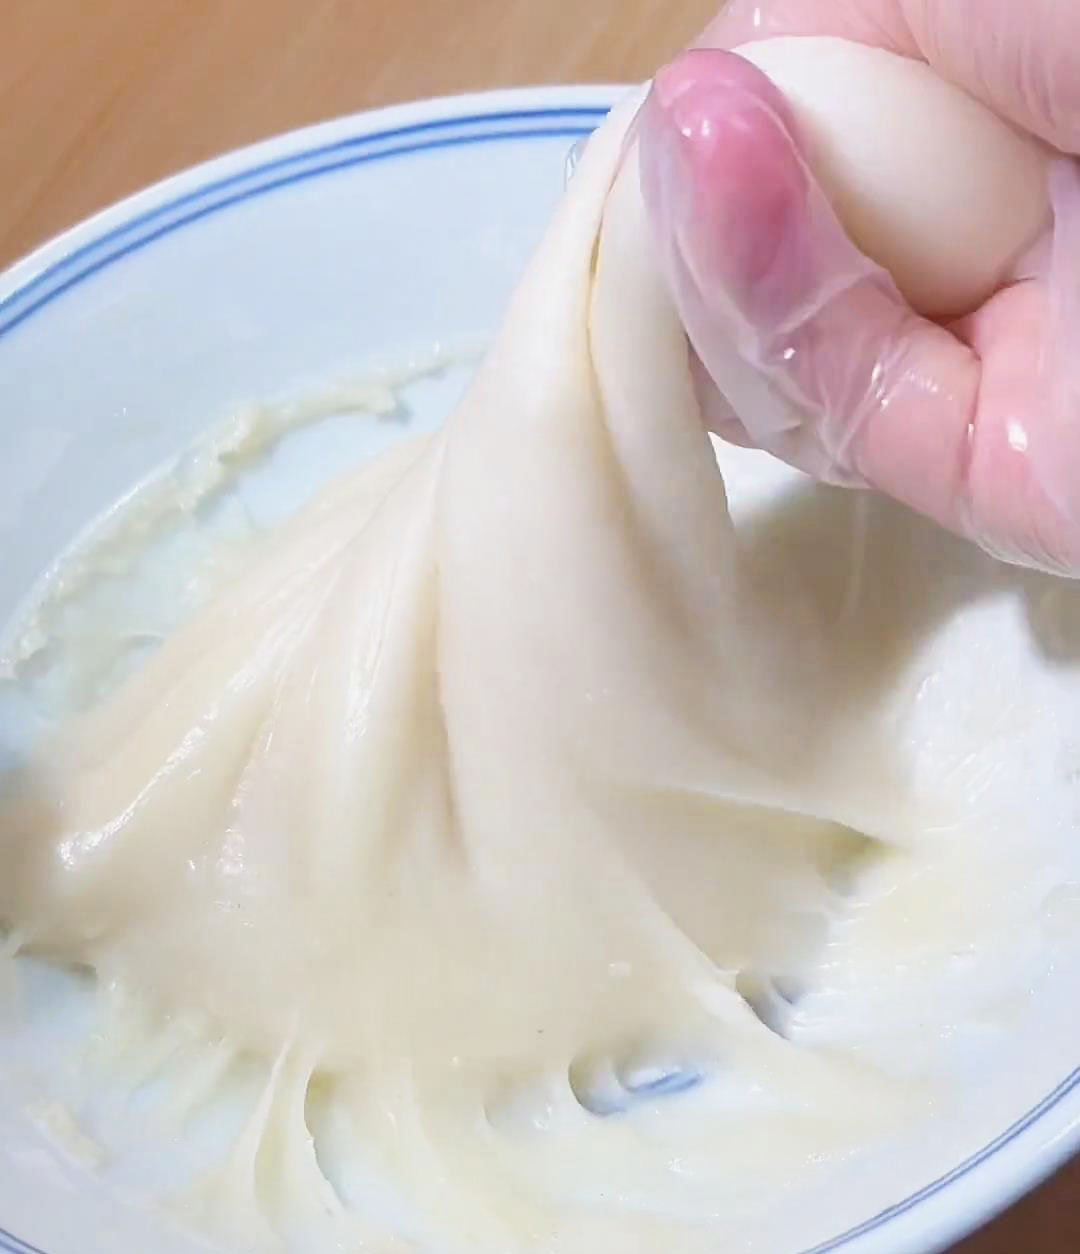 Keep mixing the dough by twisting and pulling it up with your hands